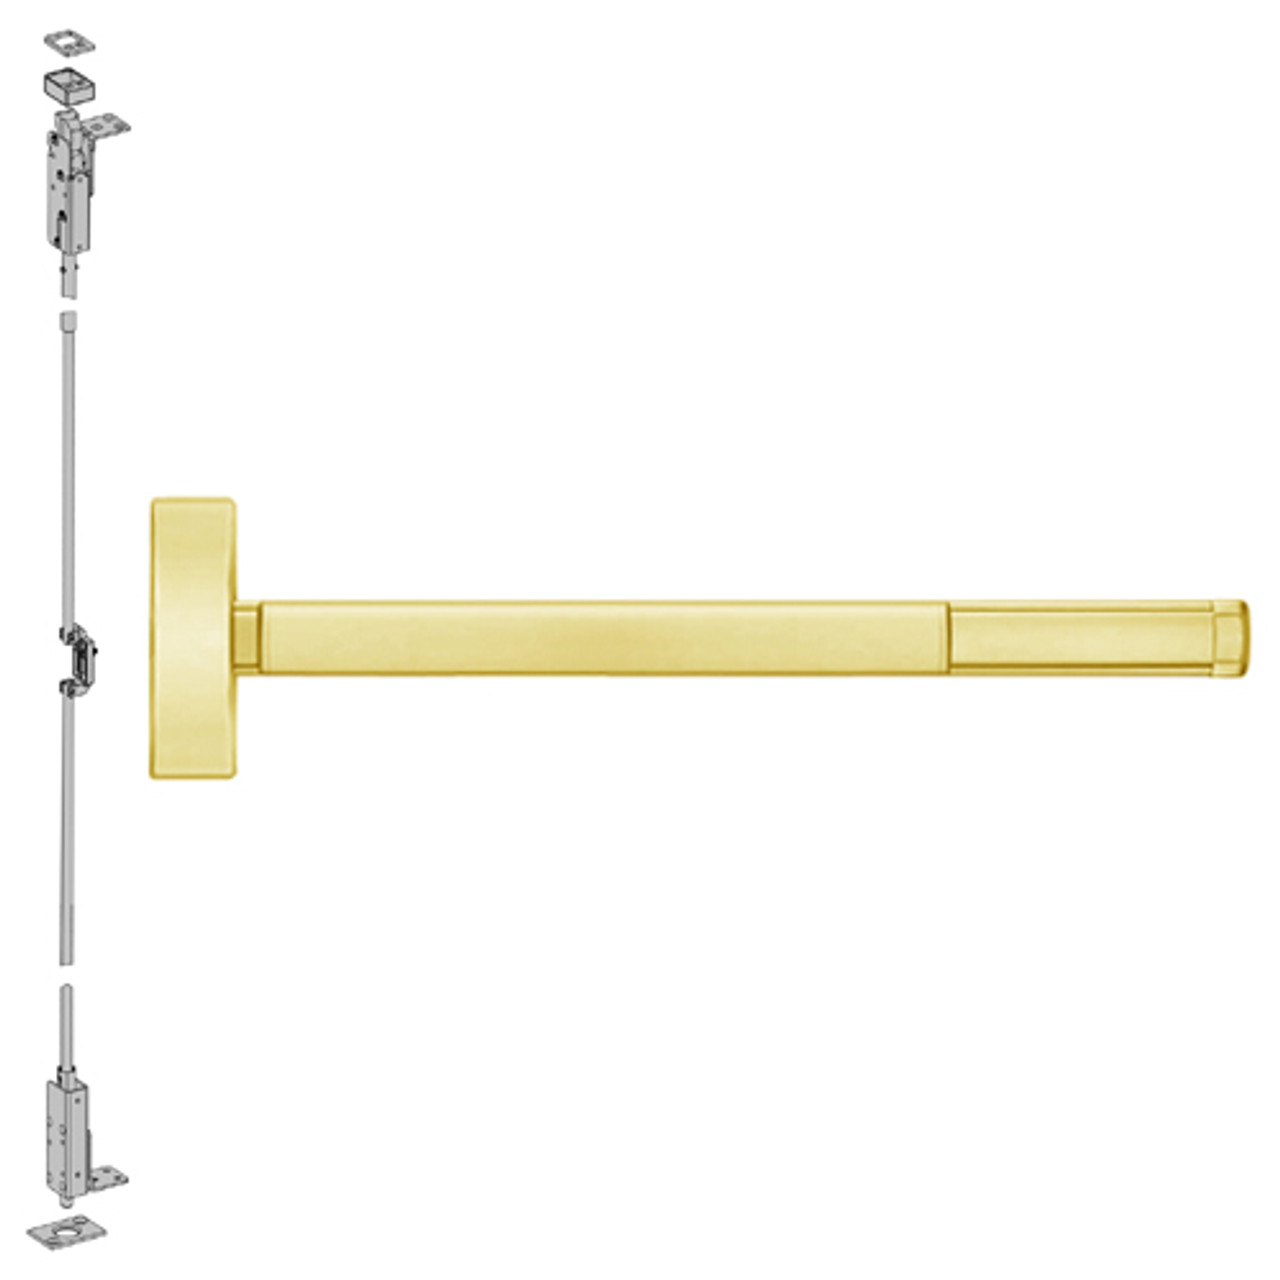 ELRFL2714-605-36 PHI 2700 Series Wood Door Concealed Vertical Exit Device with Electric Latch Retraction Prepped for Lever-Knob Always Active in Bright Brass Finish